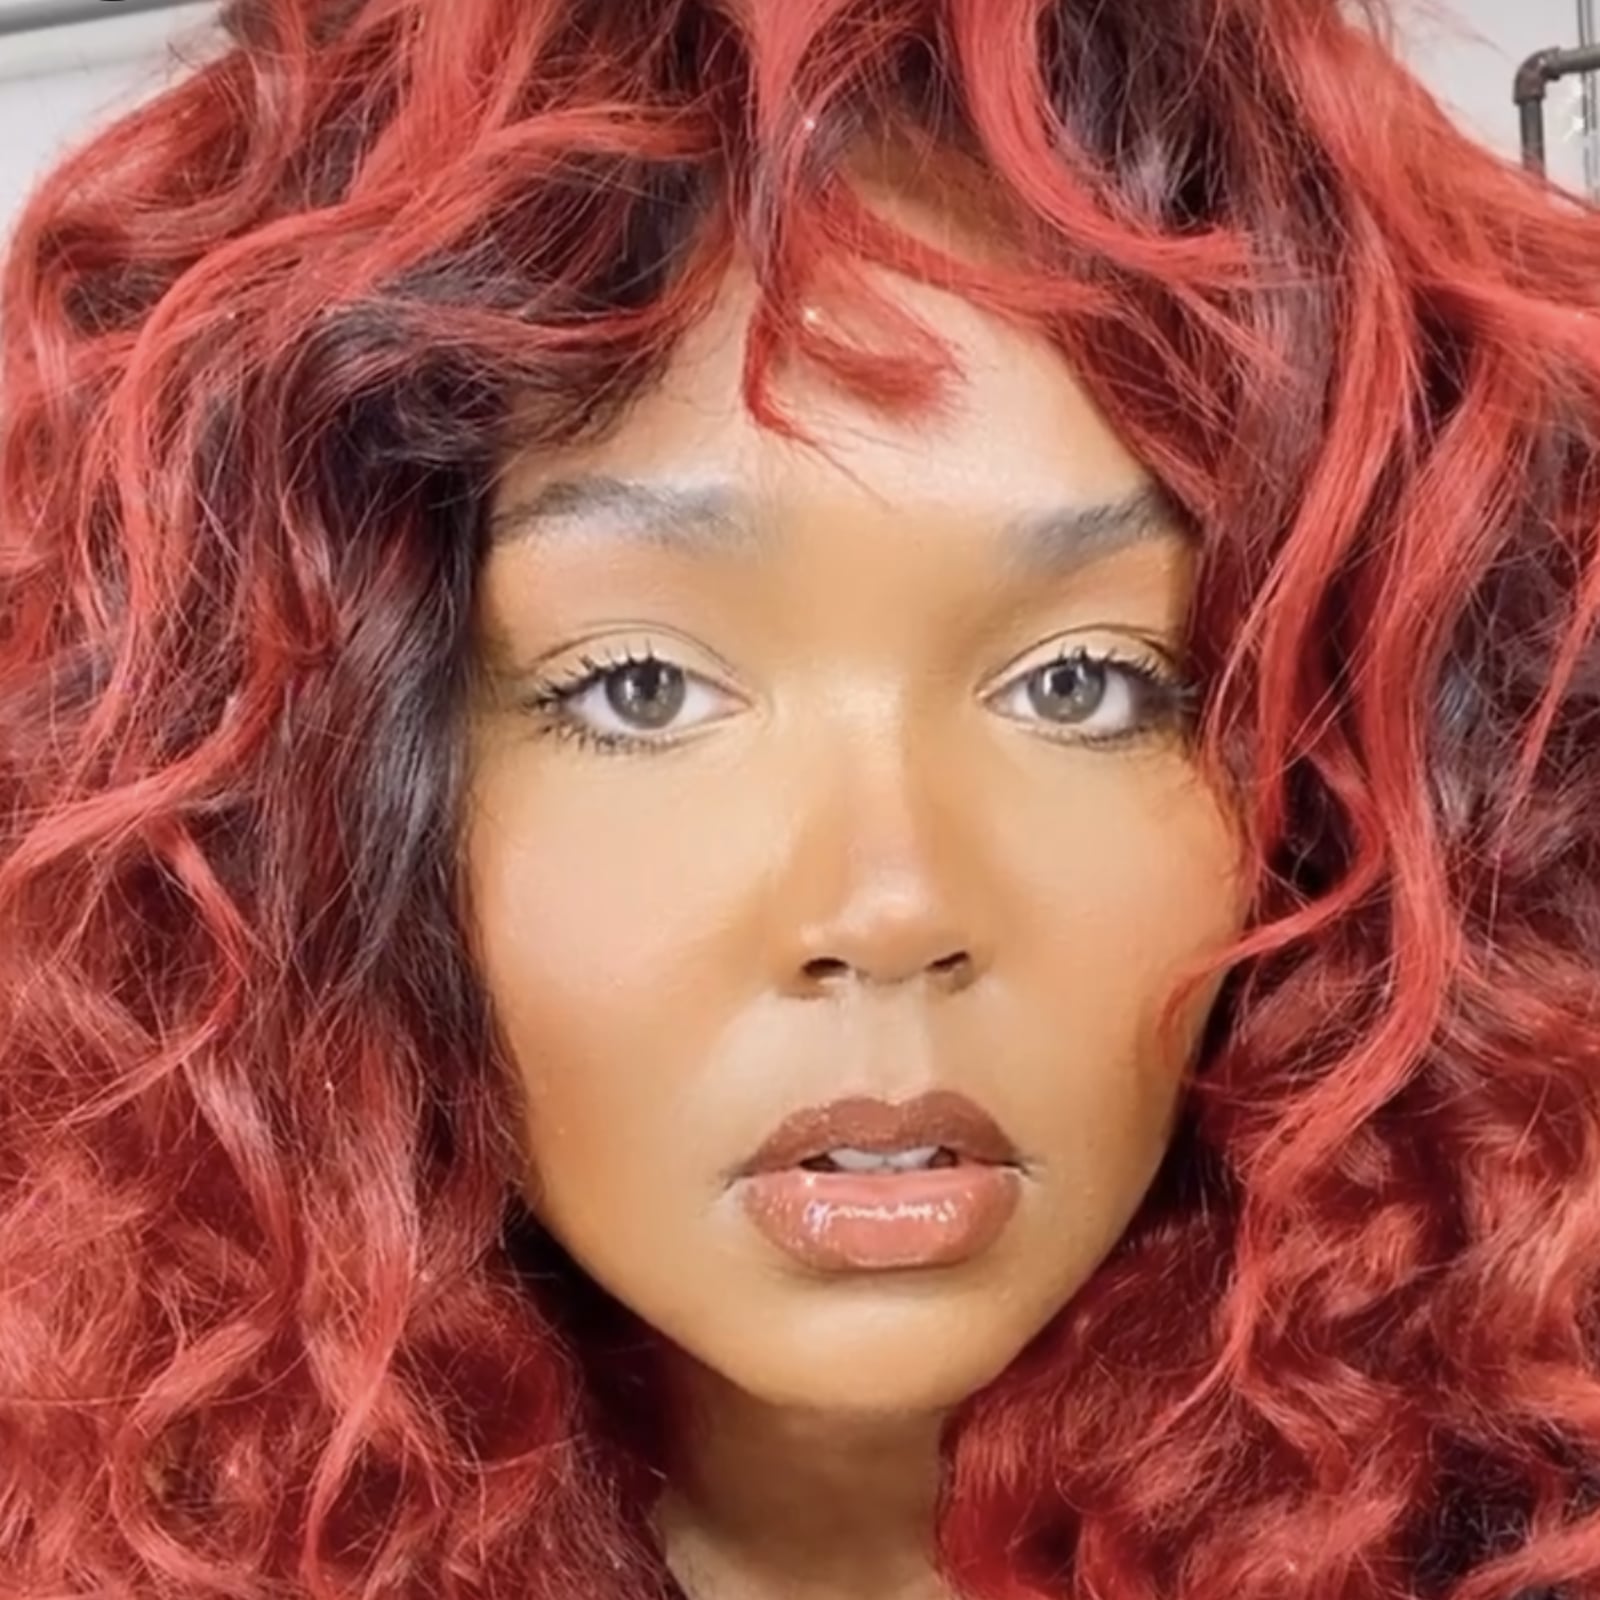 Lizzo Now Has Curly Red Hair, and She Looks So Damn Good | POPSUGAR Beauty